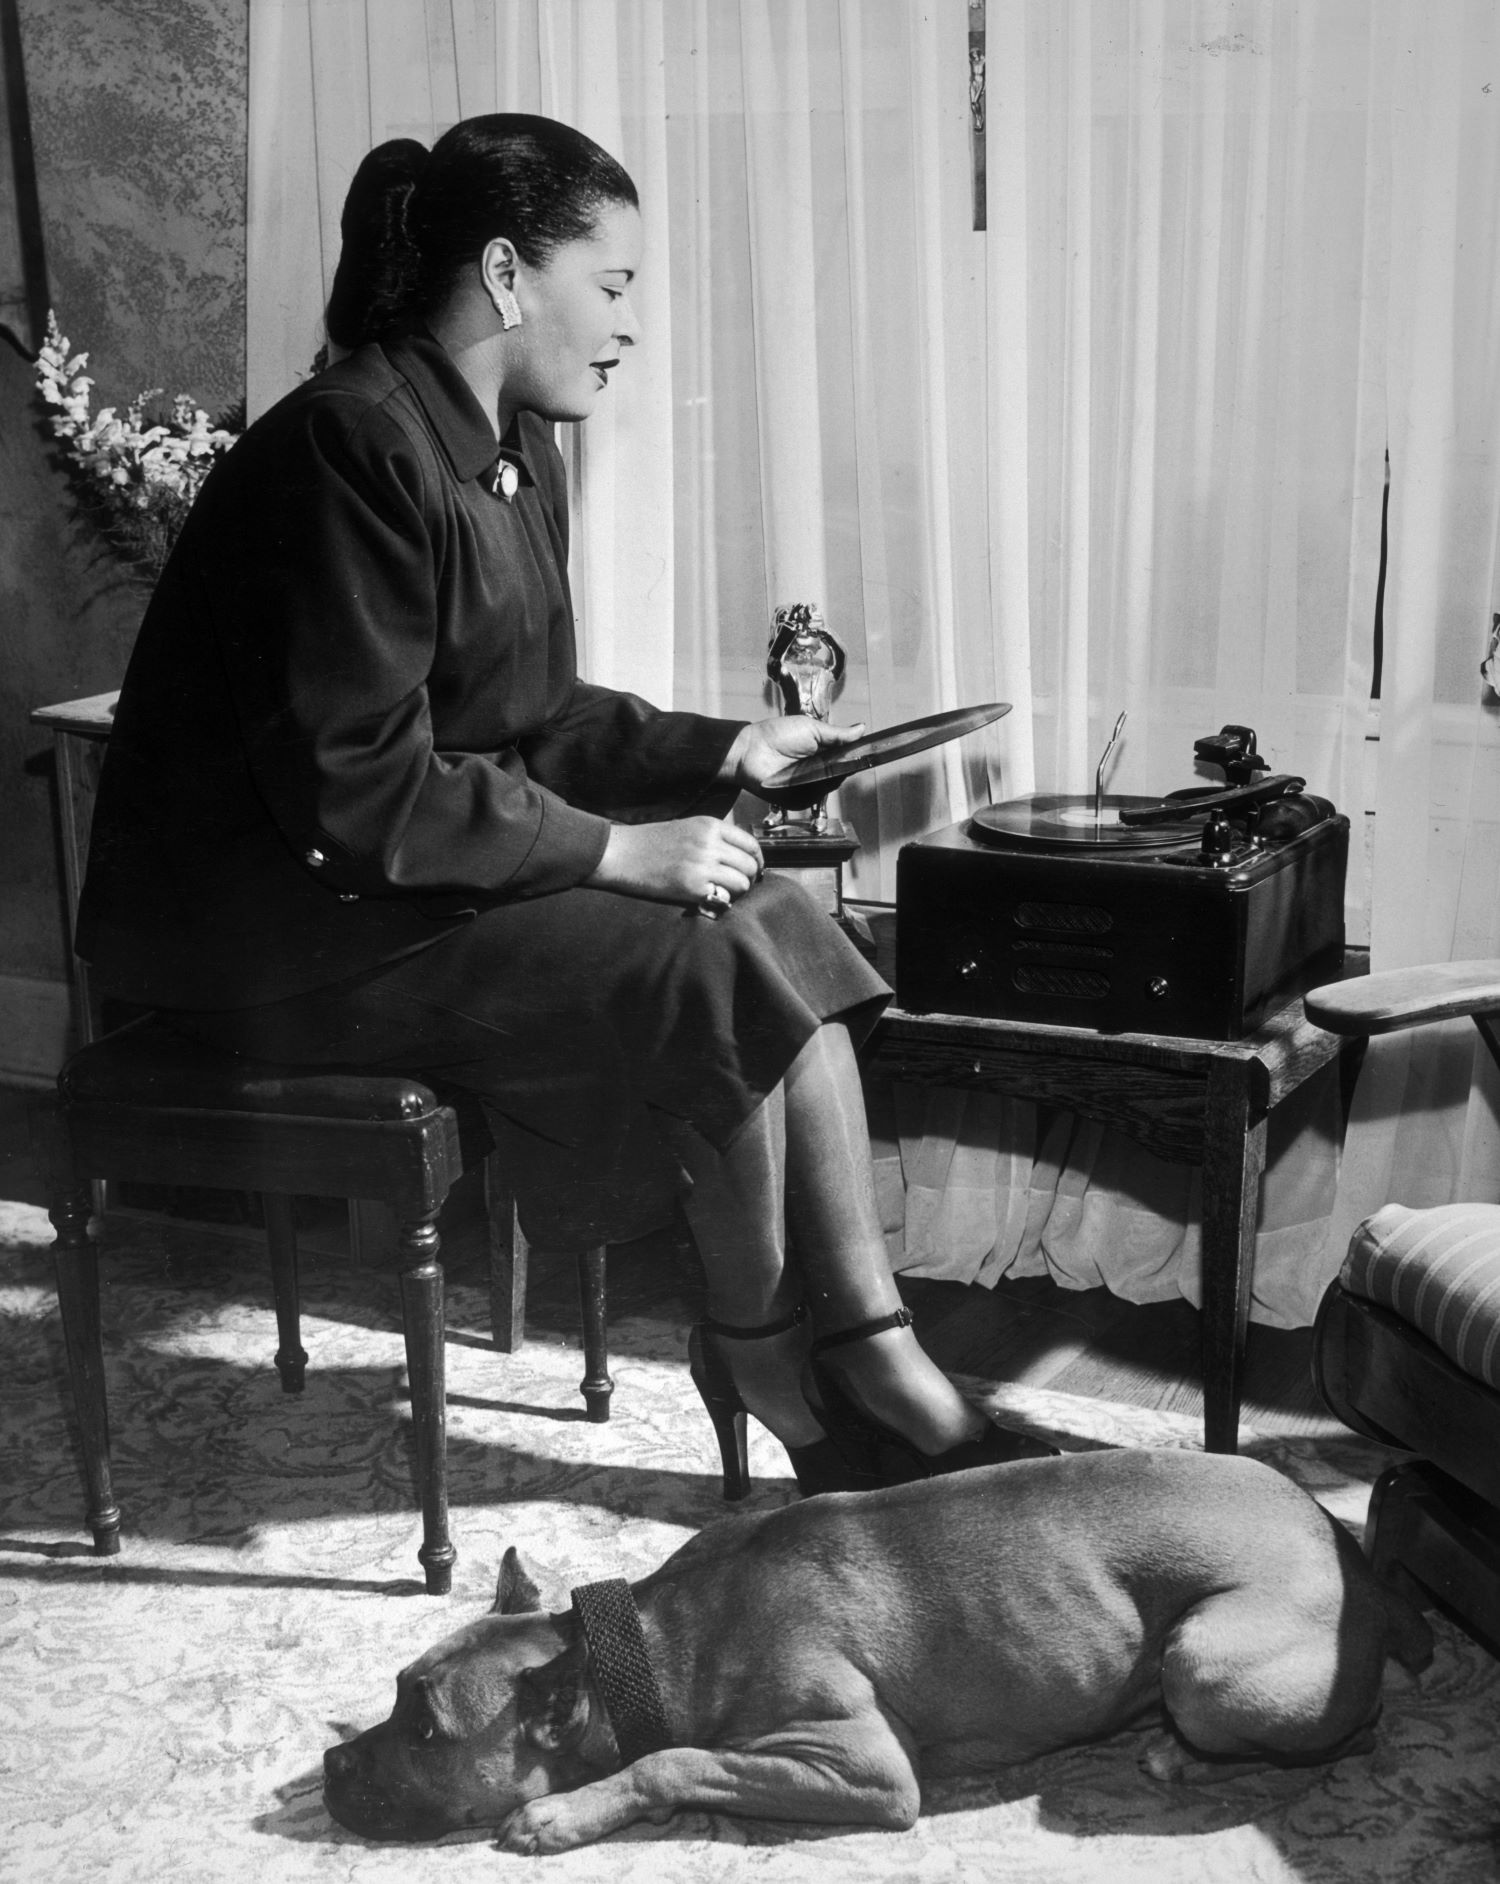 Billie Holiday and dog laying by her feet